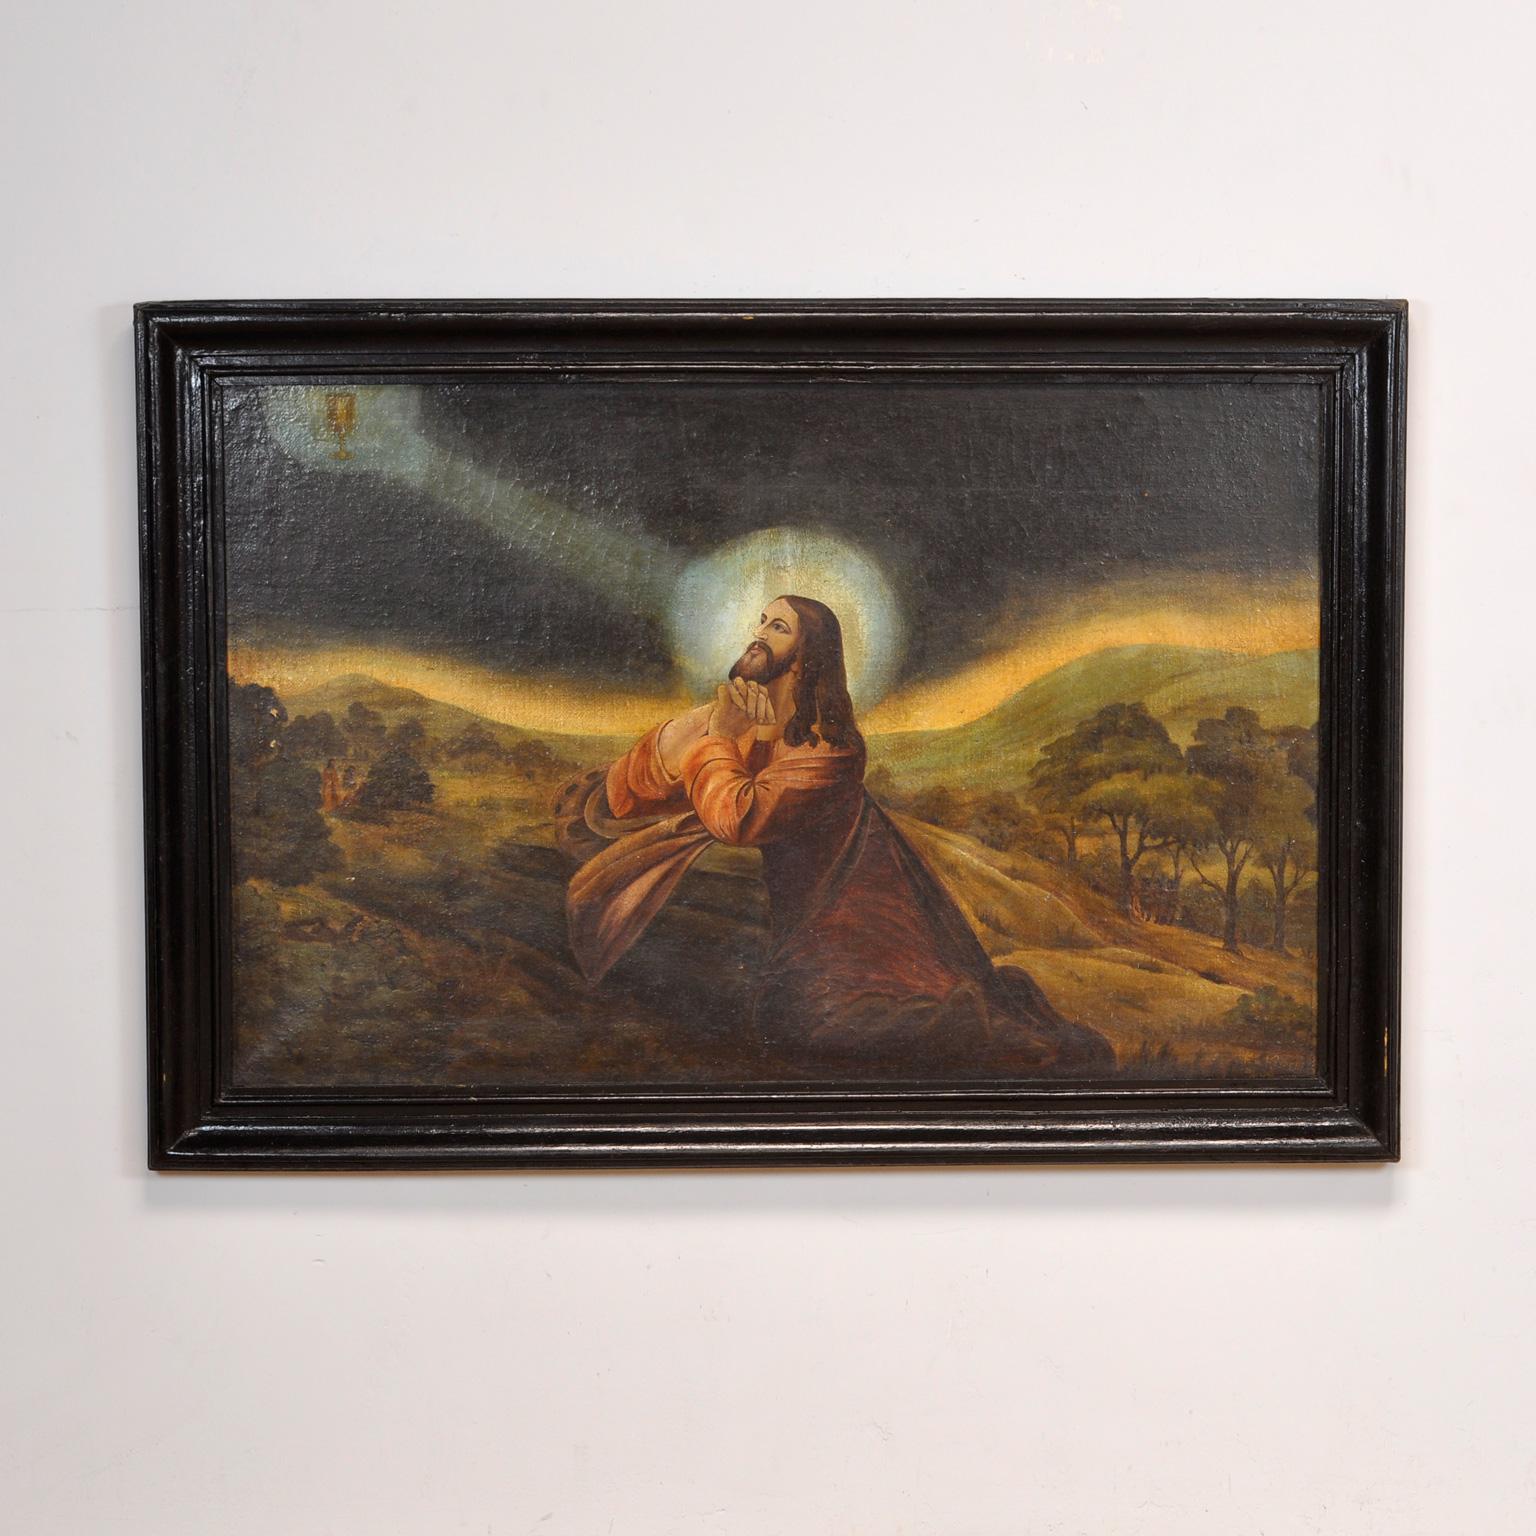 Antique Original Oil on Canvas Painting of Jesus in a nice wooden frame.
Unsigned but executed in a confident and competent manner.
I would date this to the 1900. The painting was found in a church in the east of Hungary.
The painting itself is in